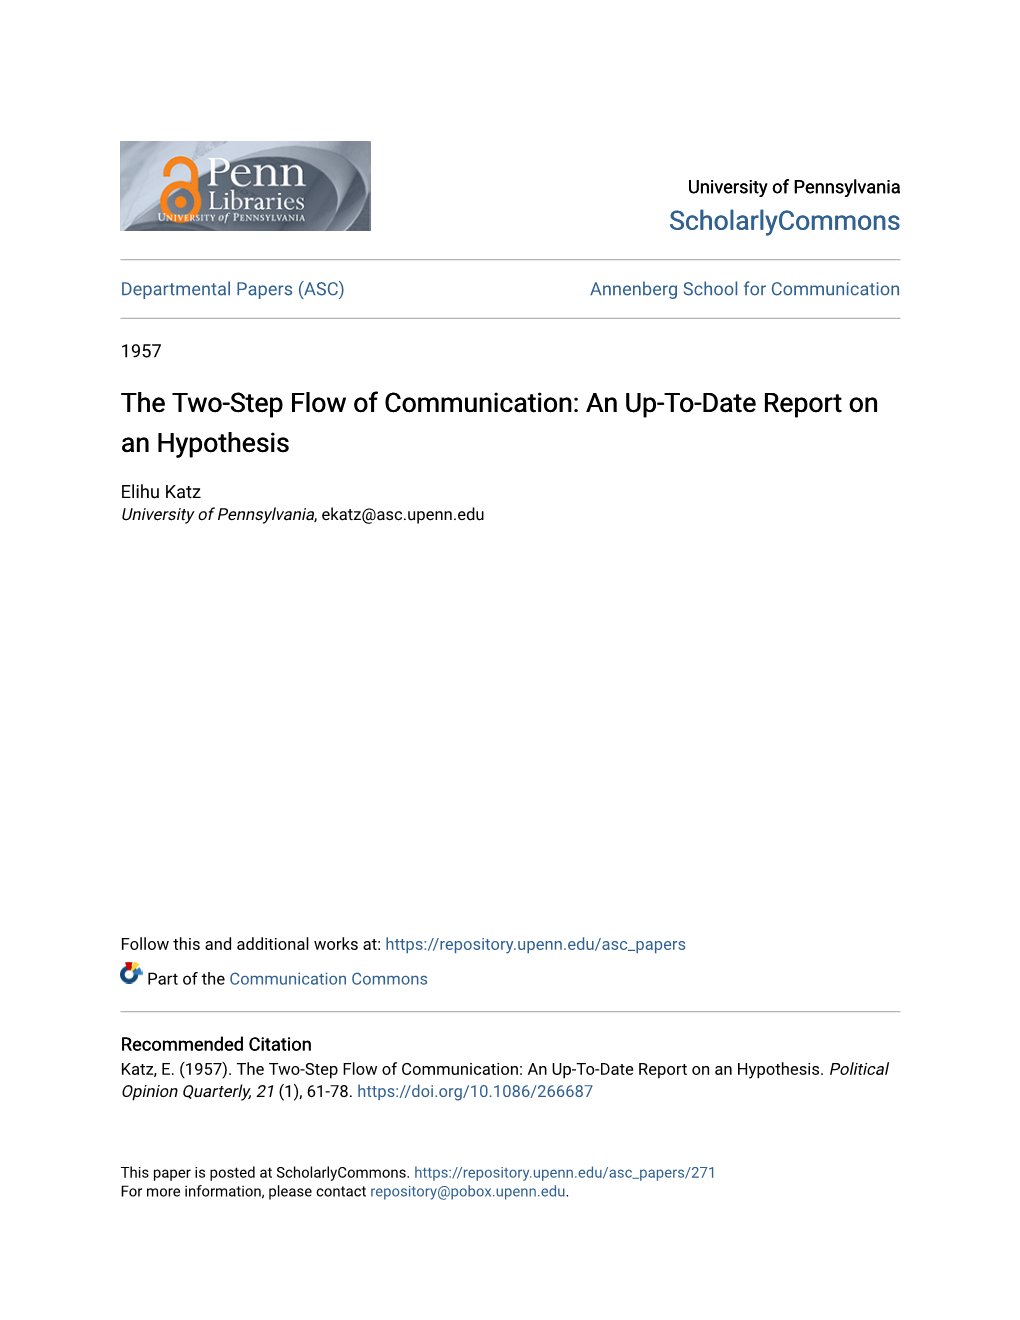 The Two-Step Flow of Communication: an Up-To-Date Report on an Hypothesis